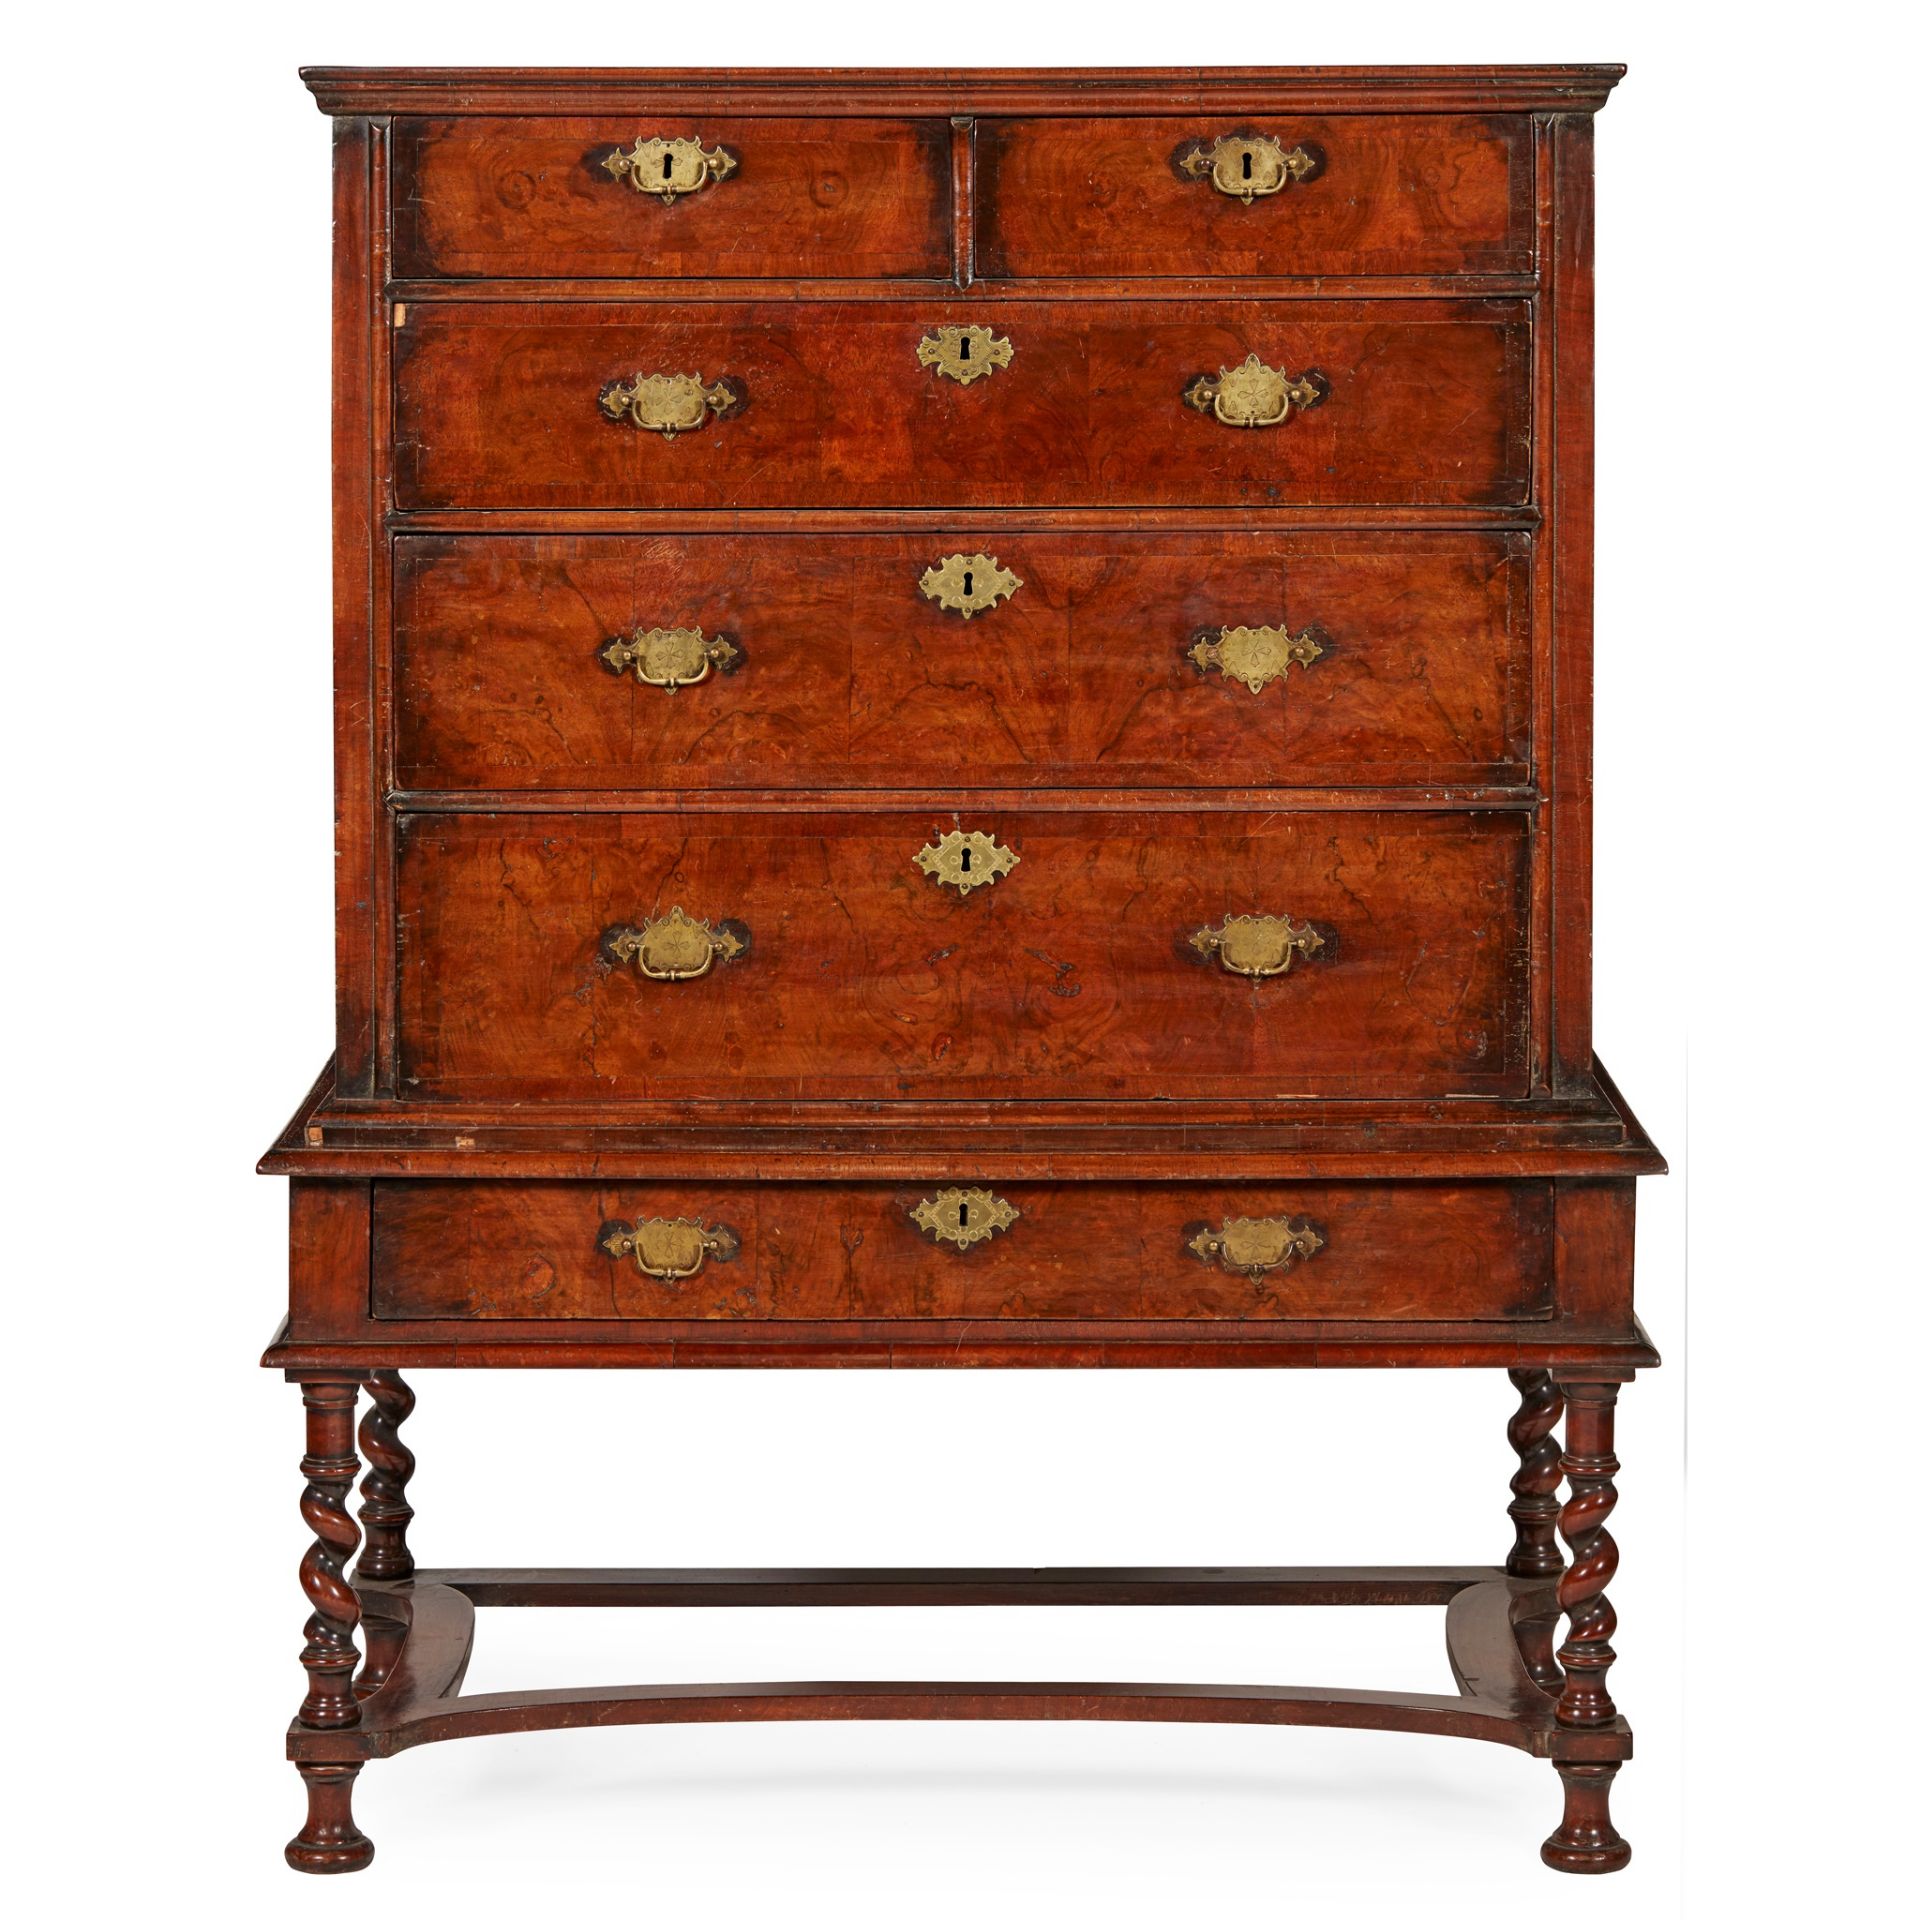 QUEEN ANNE WALNUT CHEST-ON-STAND EARLY 18TH CENTURY